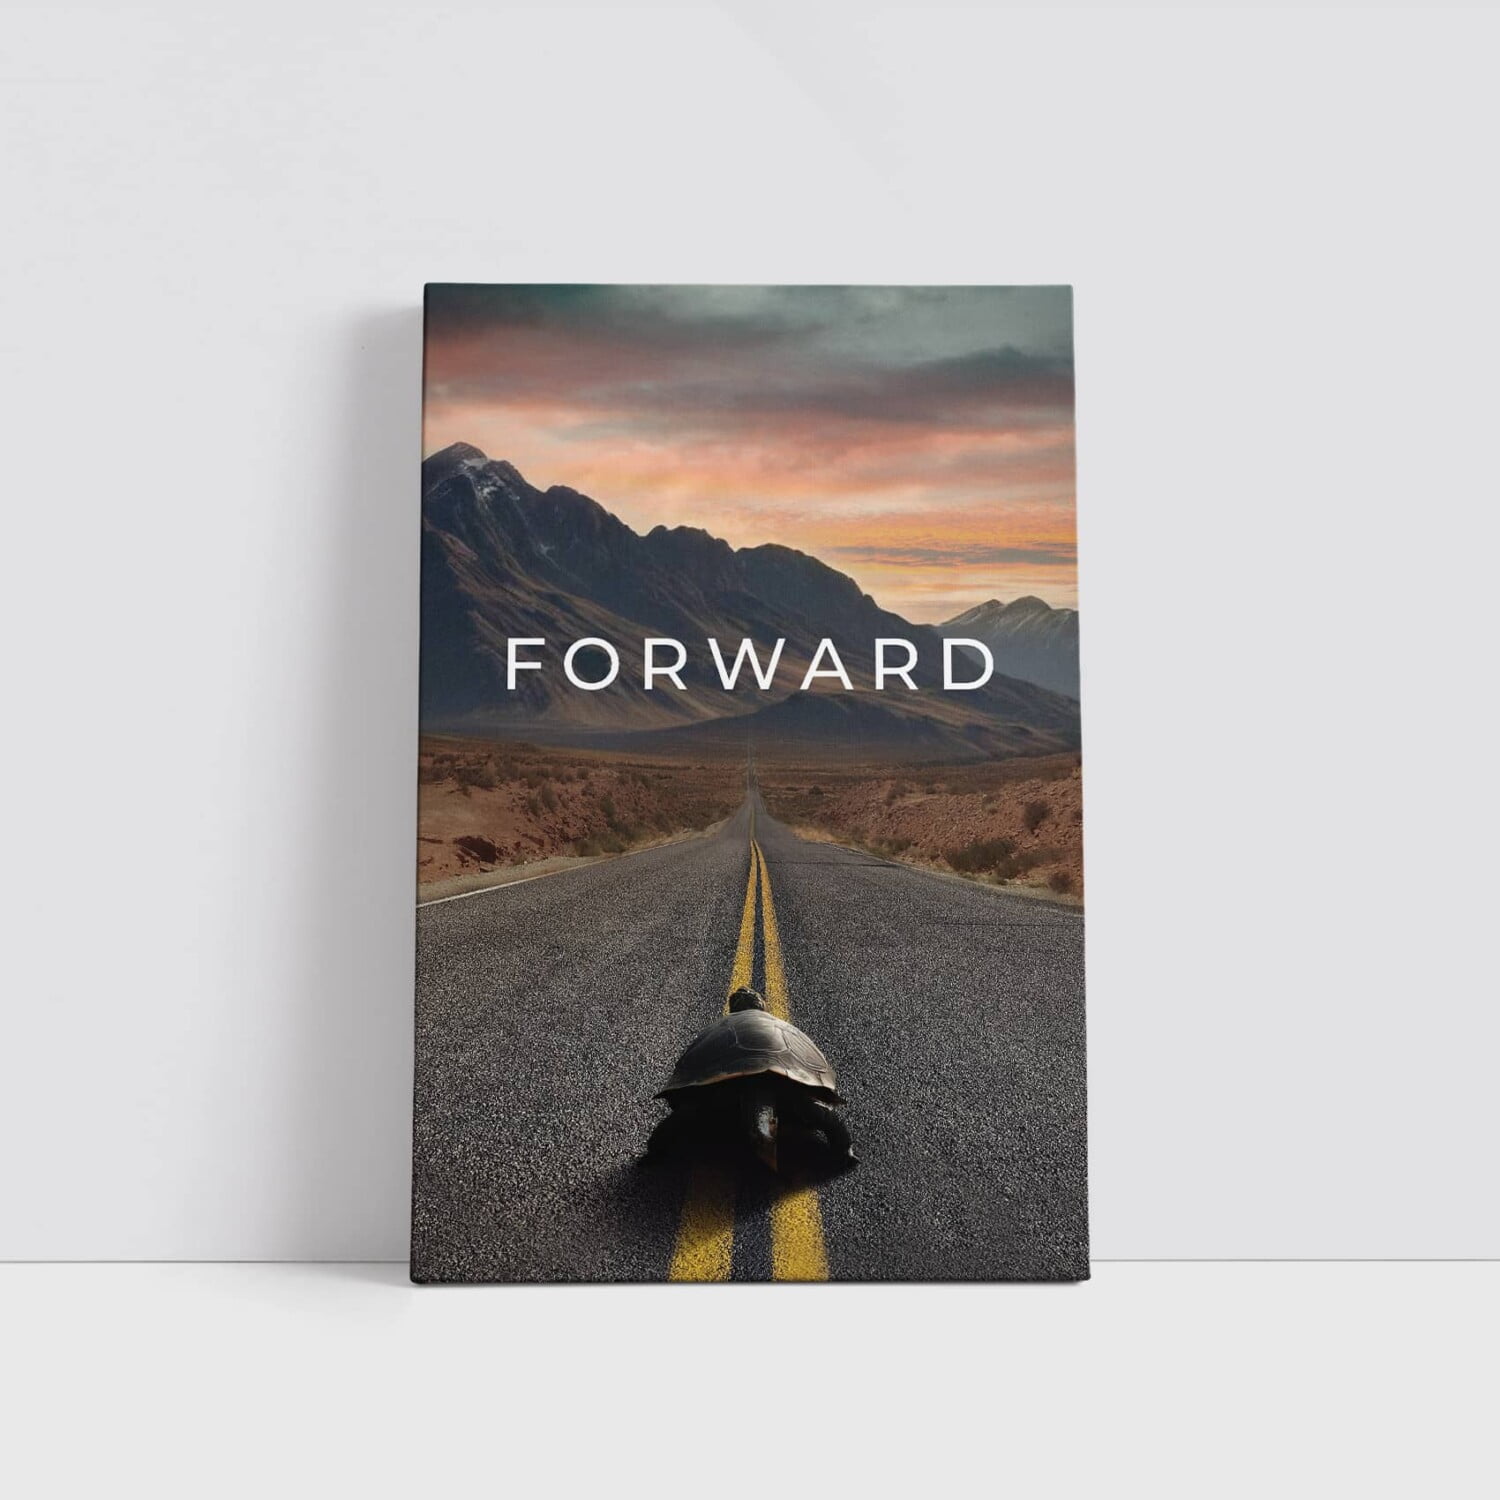 Our captivating "Forward" canvas will help inspire perseverance and the power of gradual progress. Printed in Co. Monaghan, Ireland